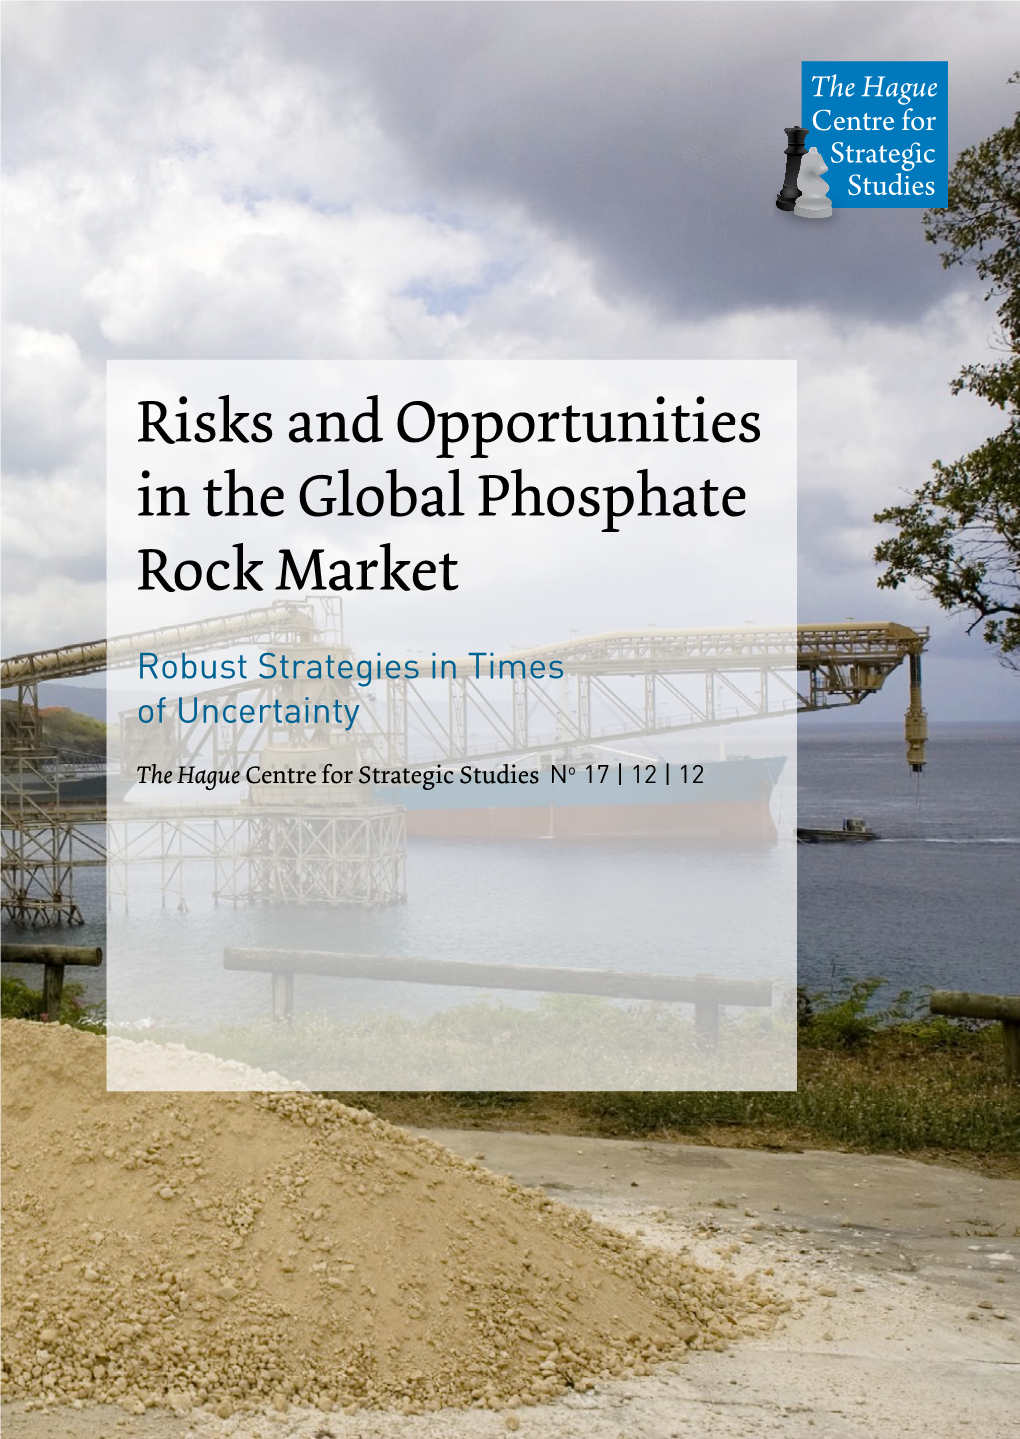 Risks and Opportunities in the Global Phosphate Rock Market